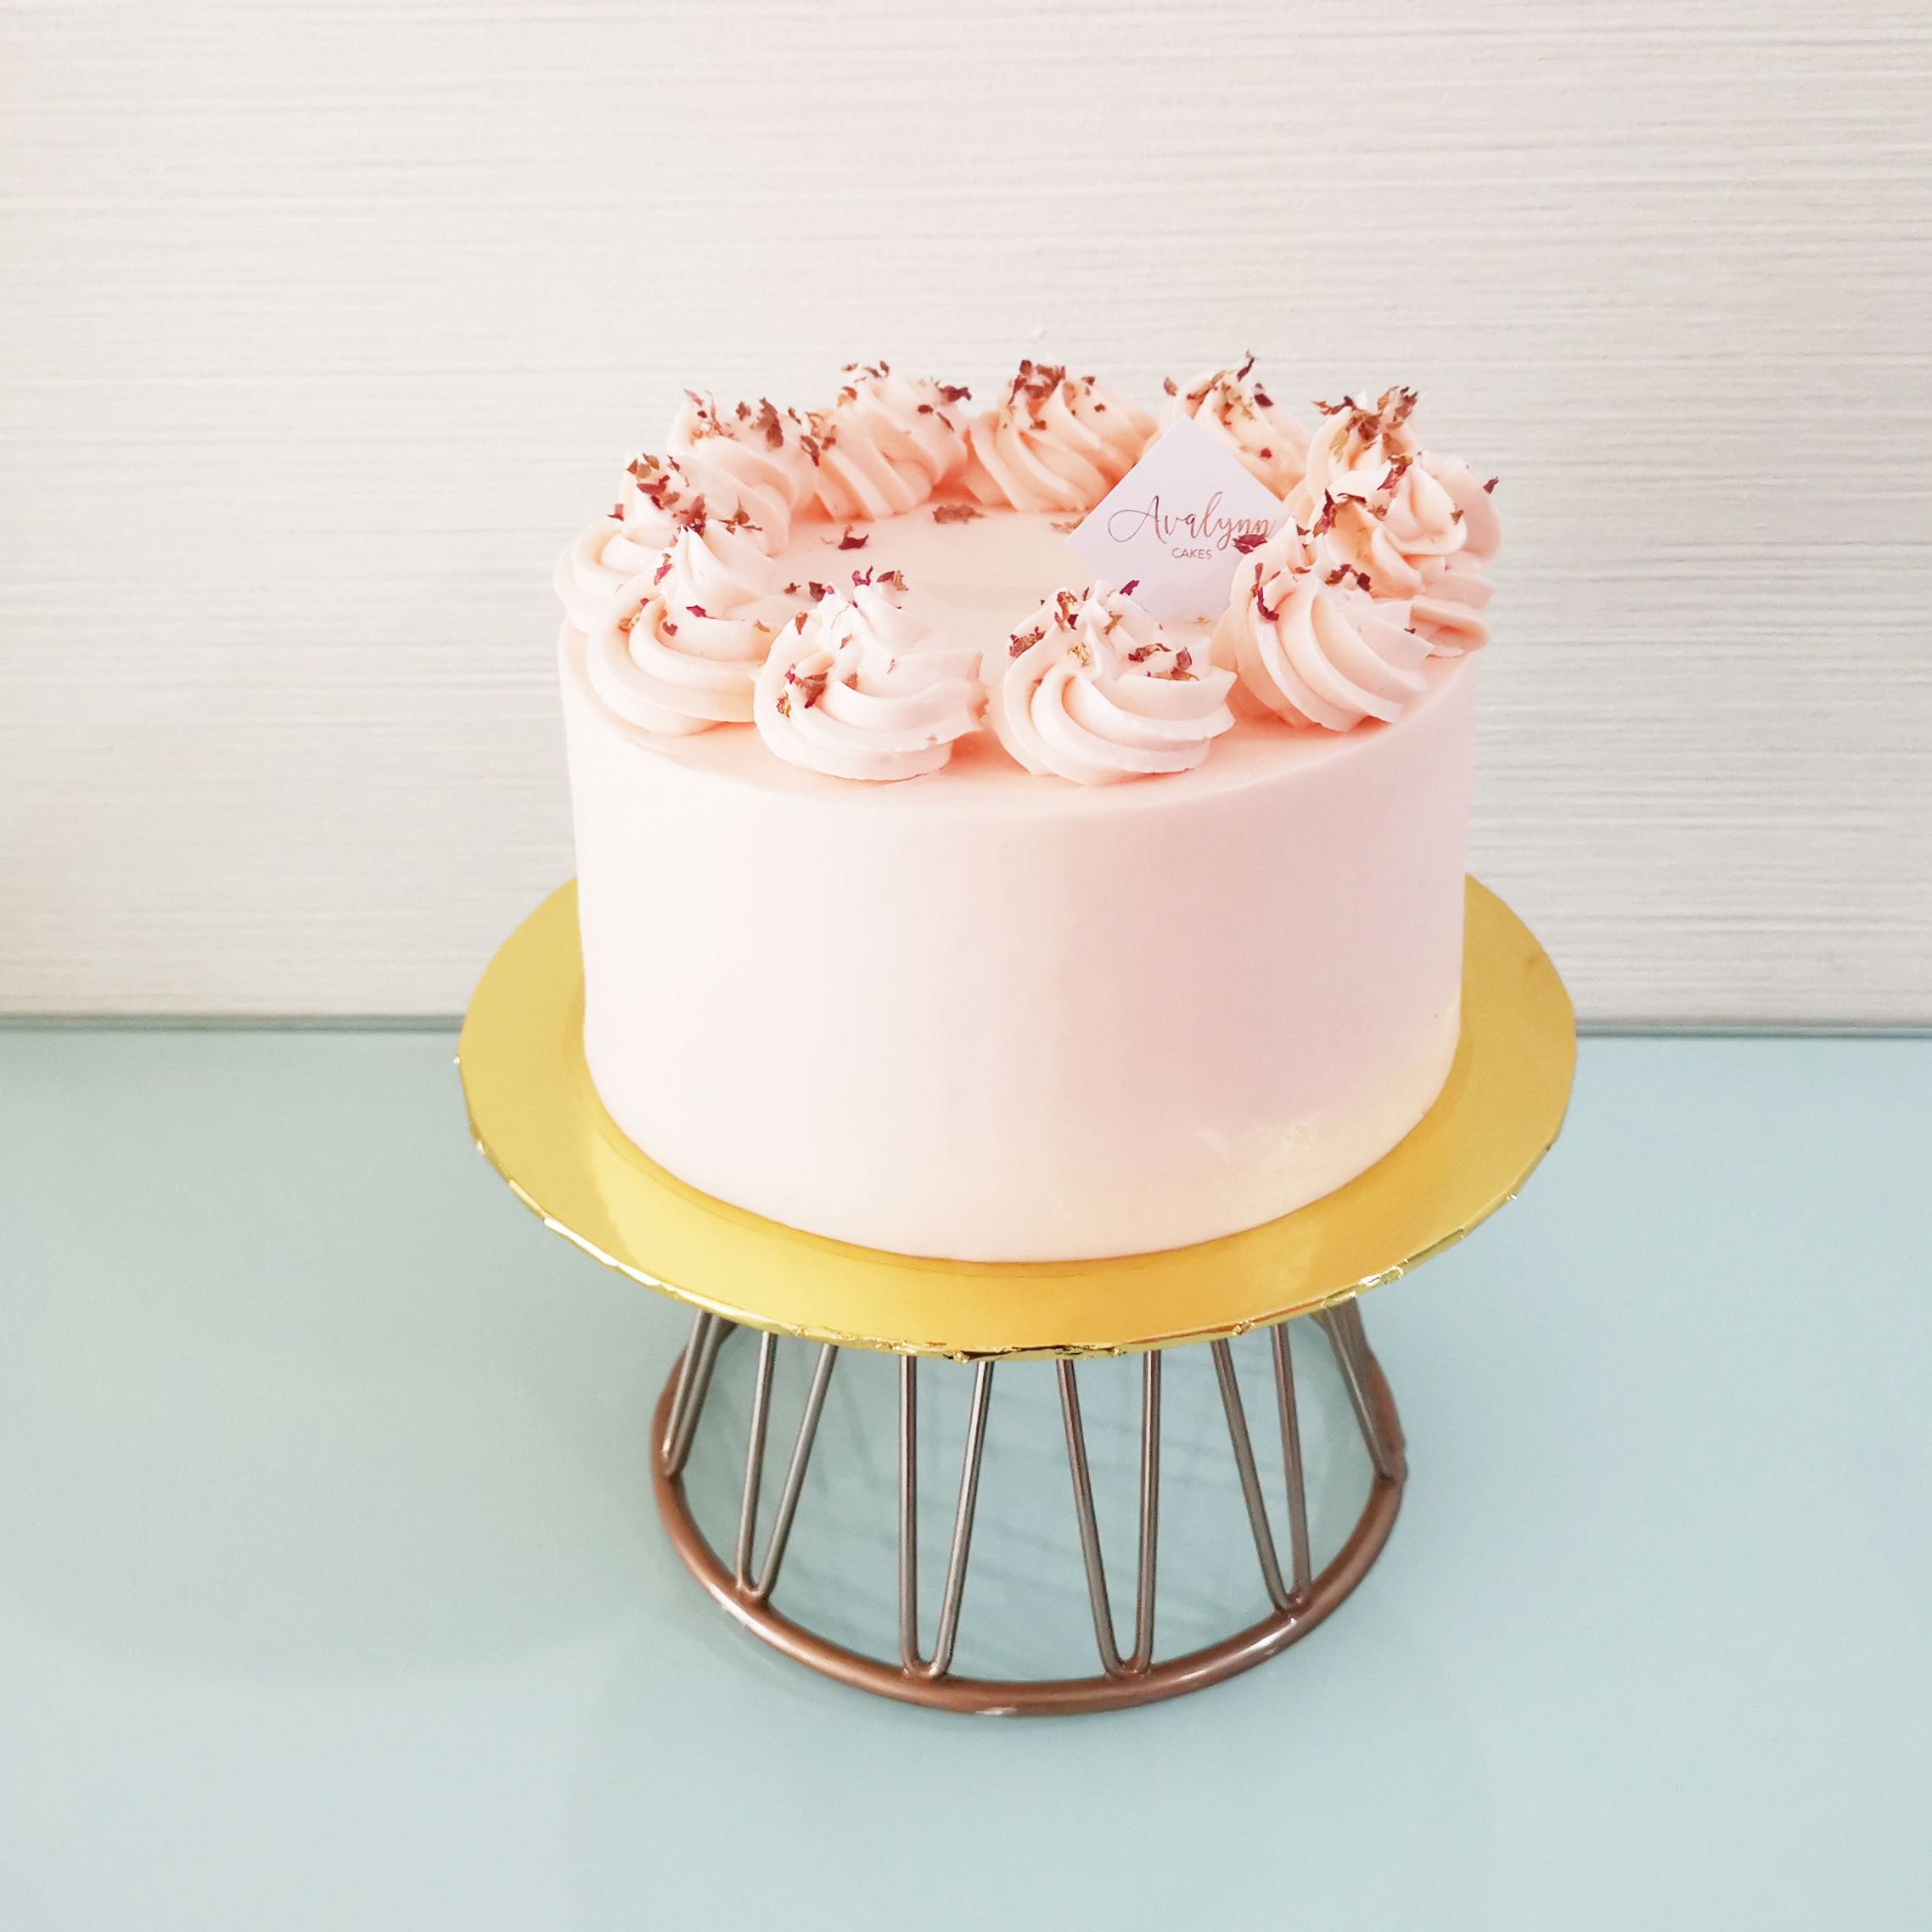 Rose Lychee Cake | Eat Cake Today | Online 6 Inch Cake Delivery KL/PJ